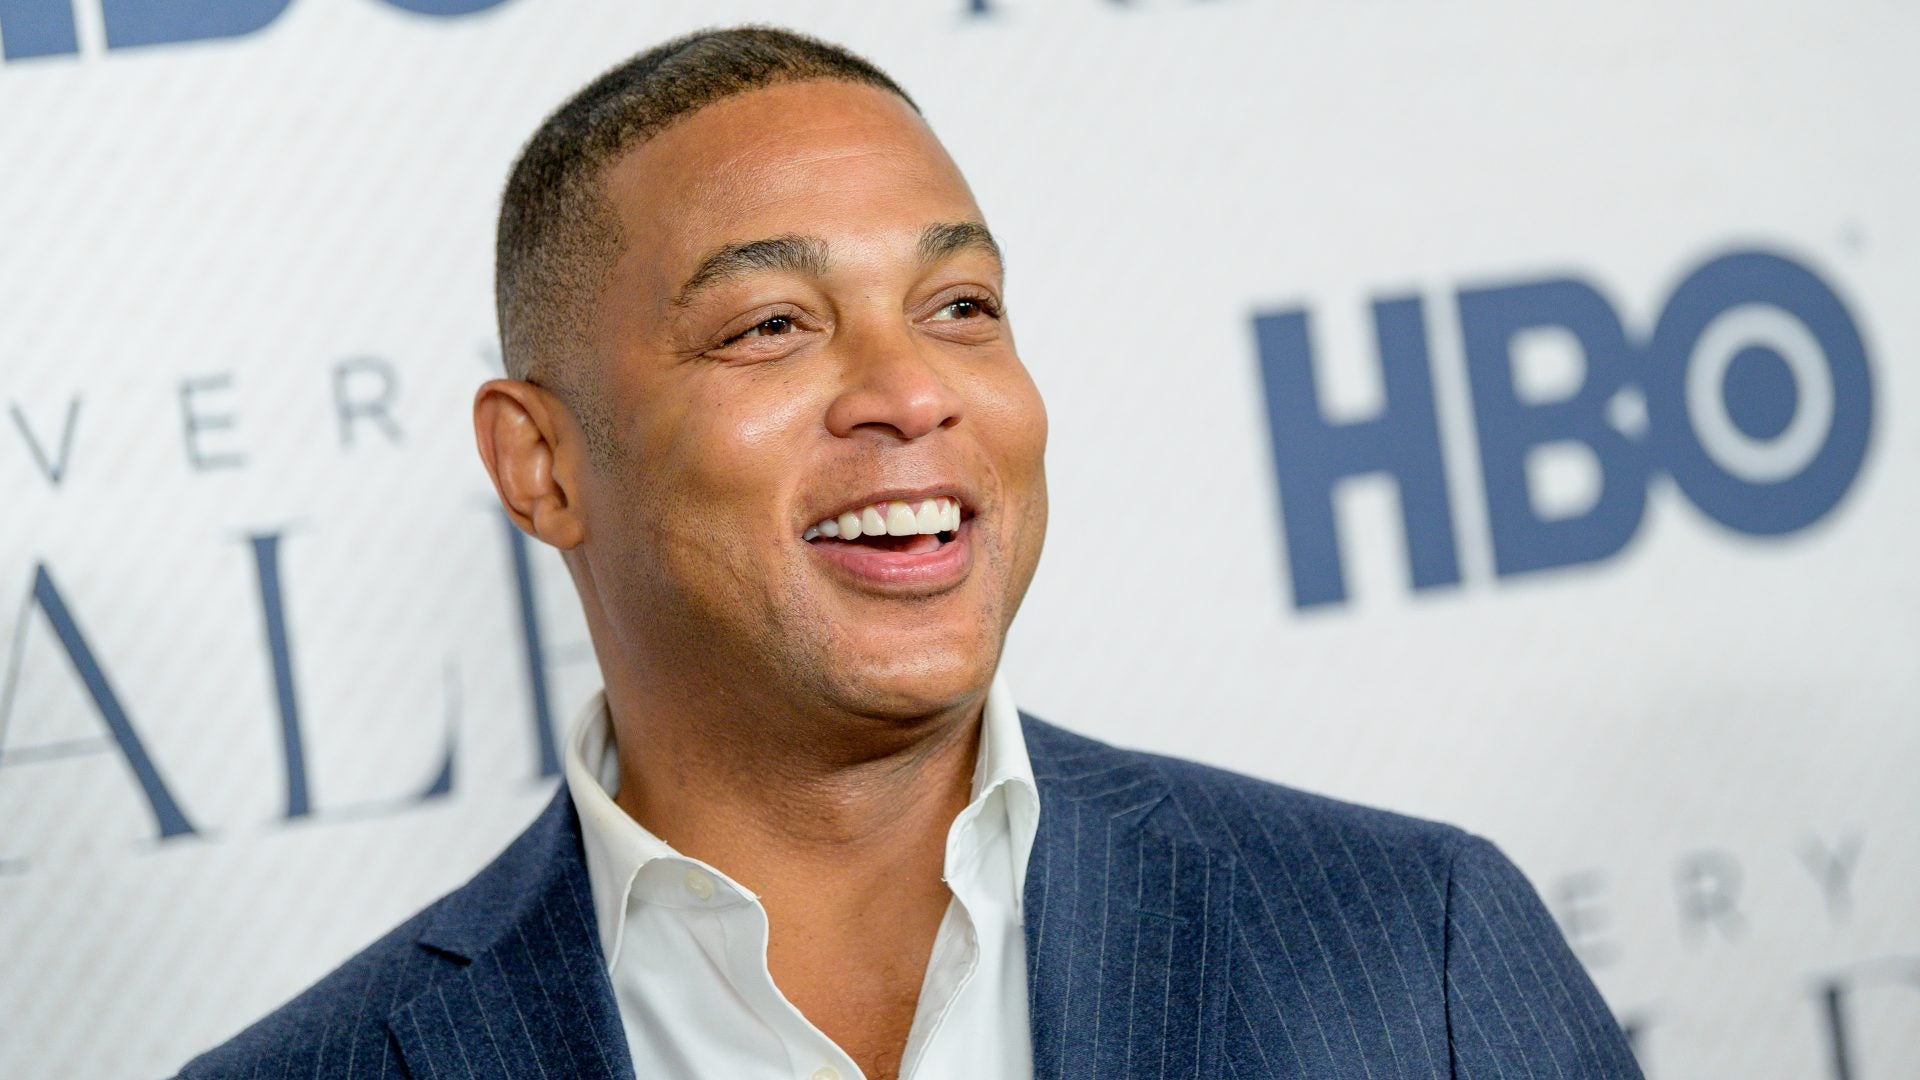 Don Lemon To Be Honored By Human Rights Campaign For LGBTQ Advocacy